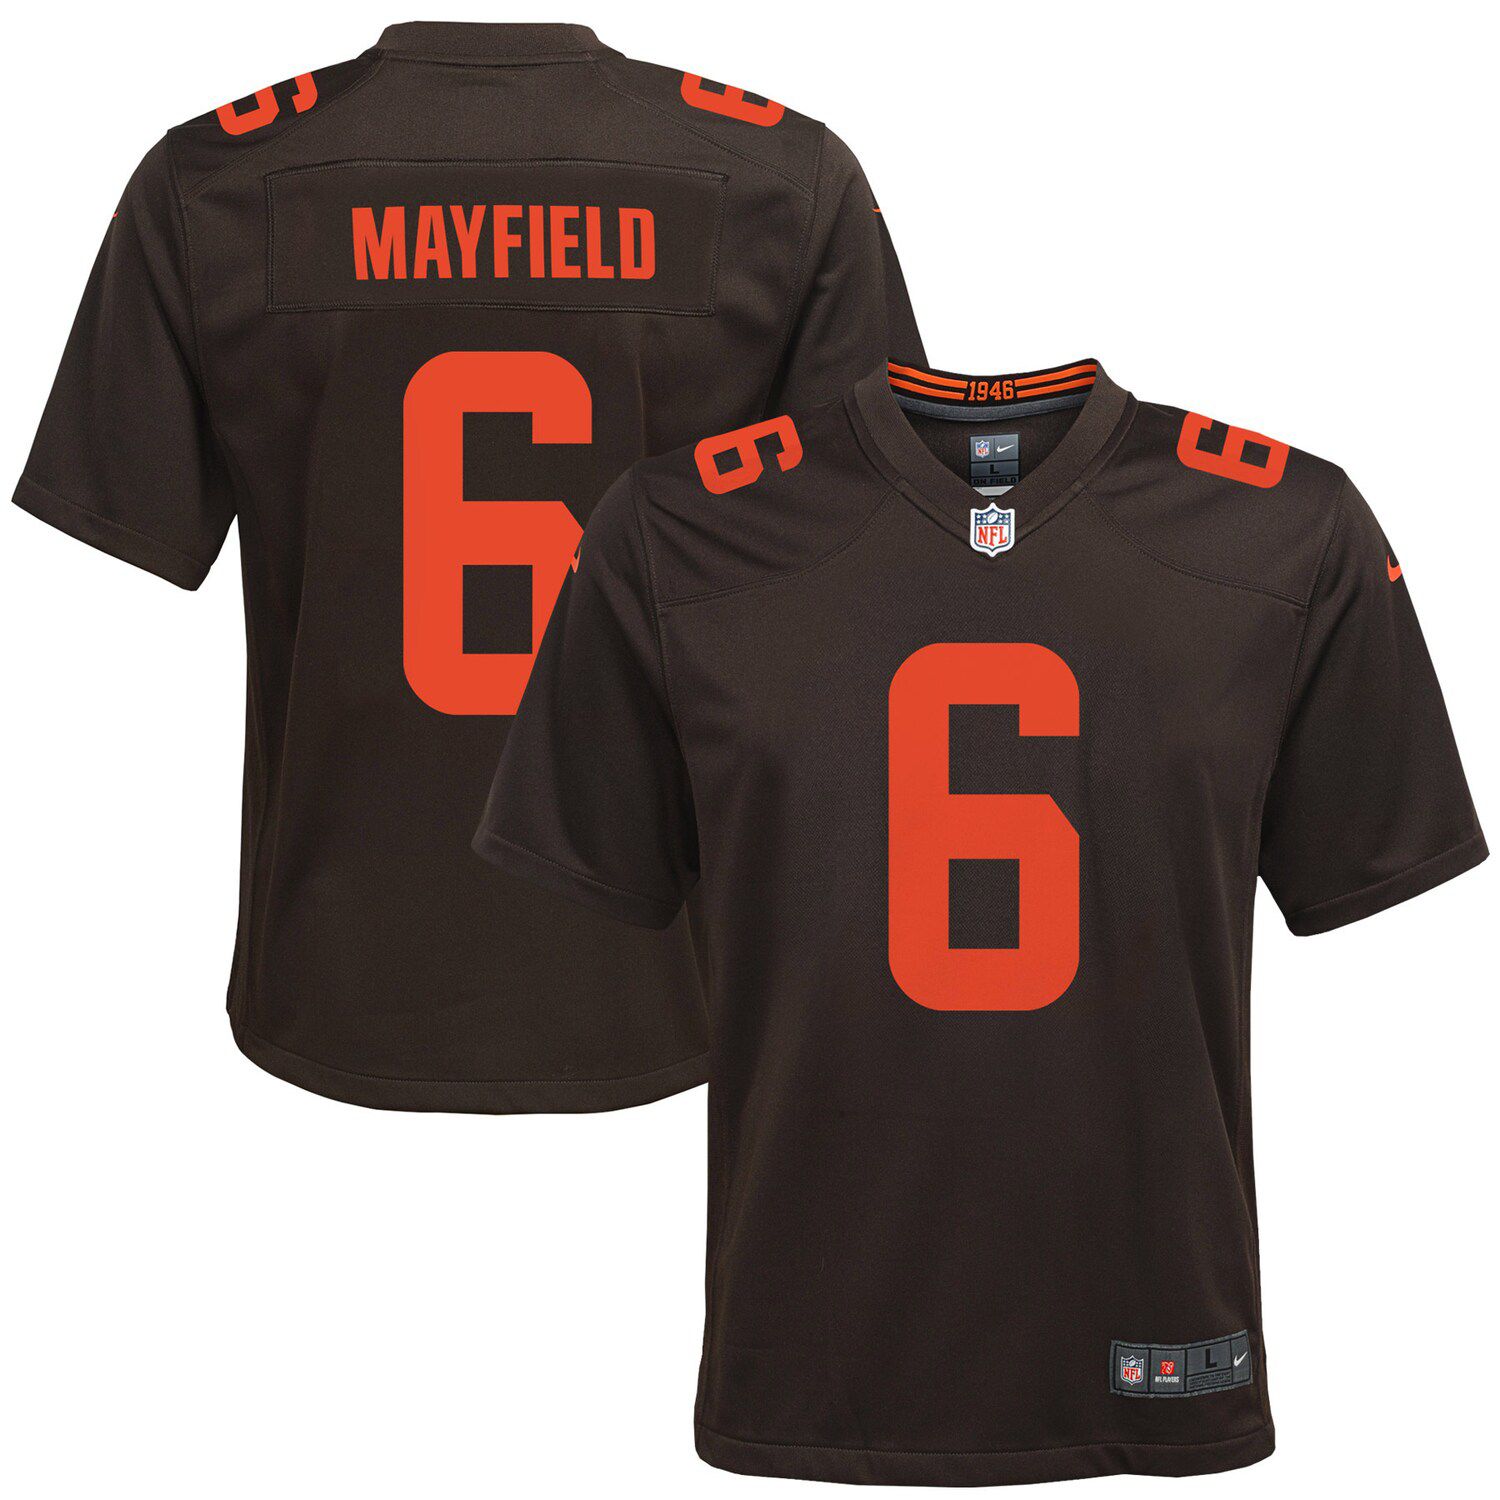 mayfield youth jersey